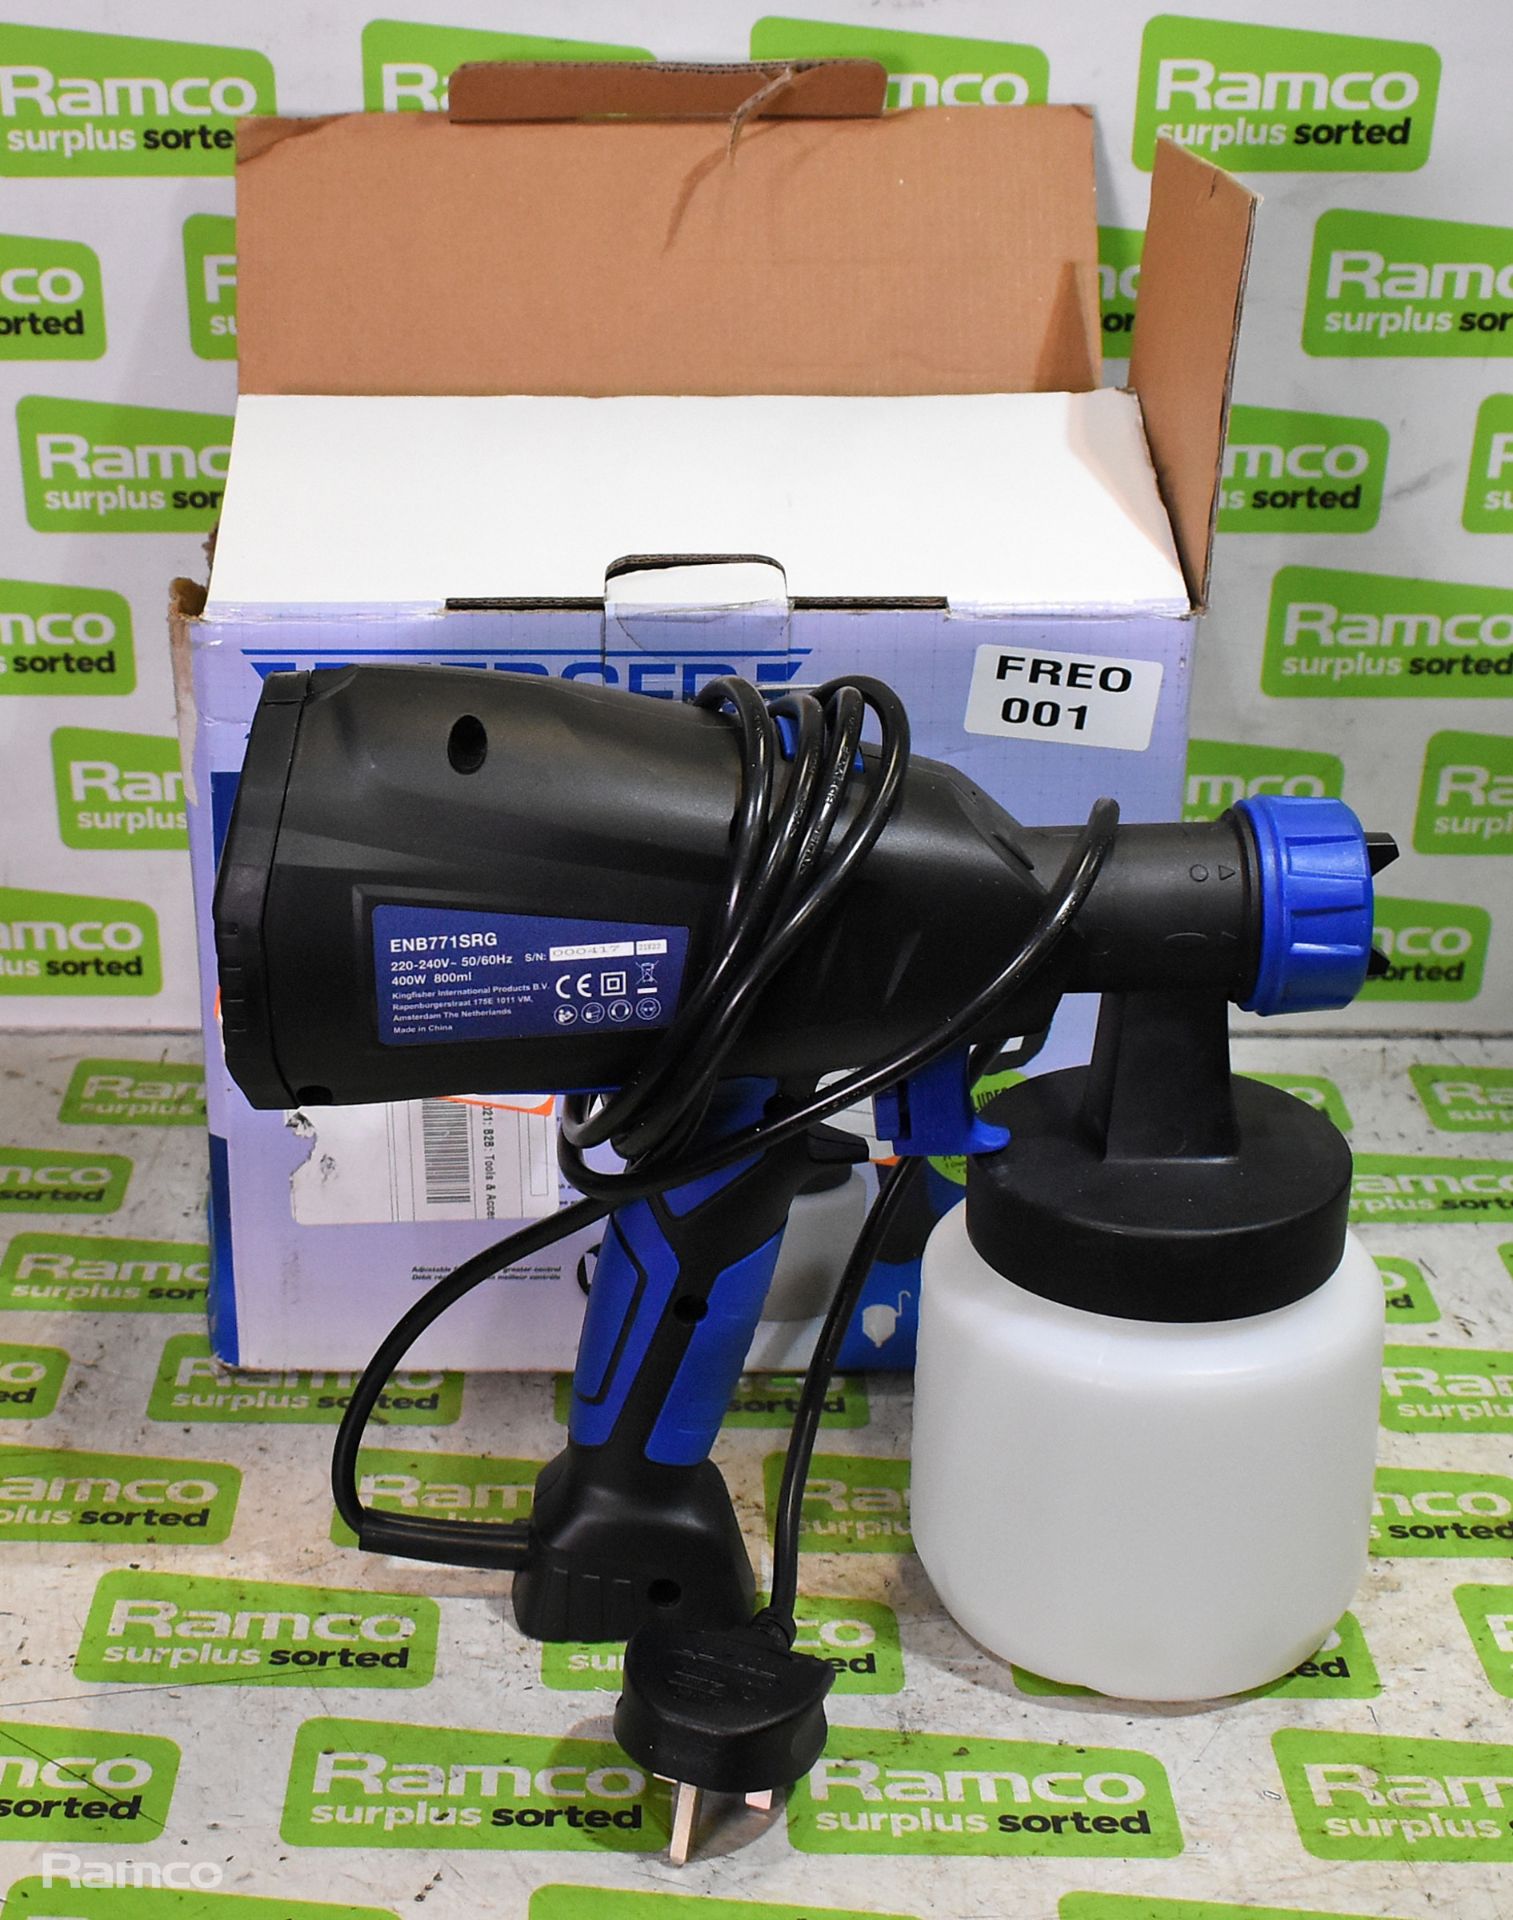 3x Energer 400 W paint sprayers - as spares and repairs, 2x Erbauer EDLS160 160 W sanders - spares - Image 6 of 22